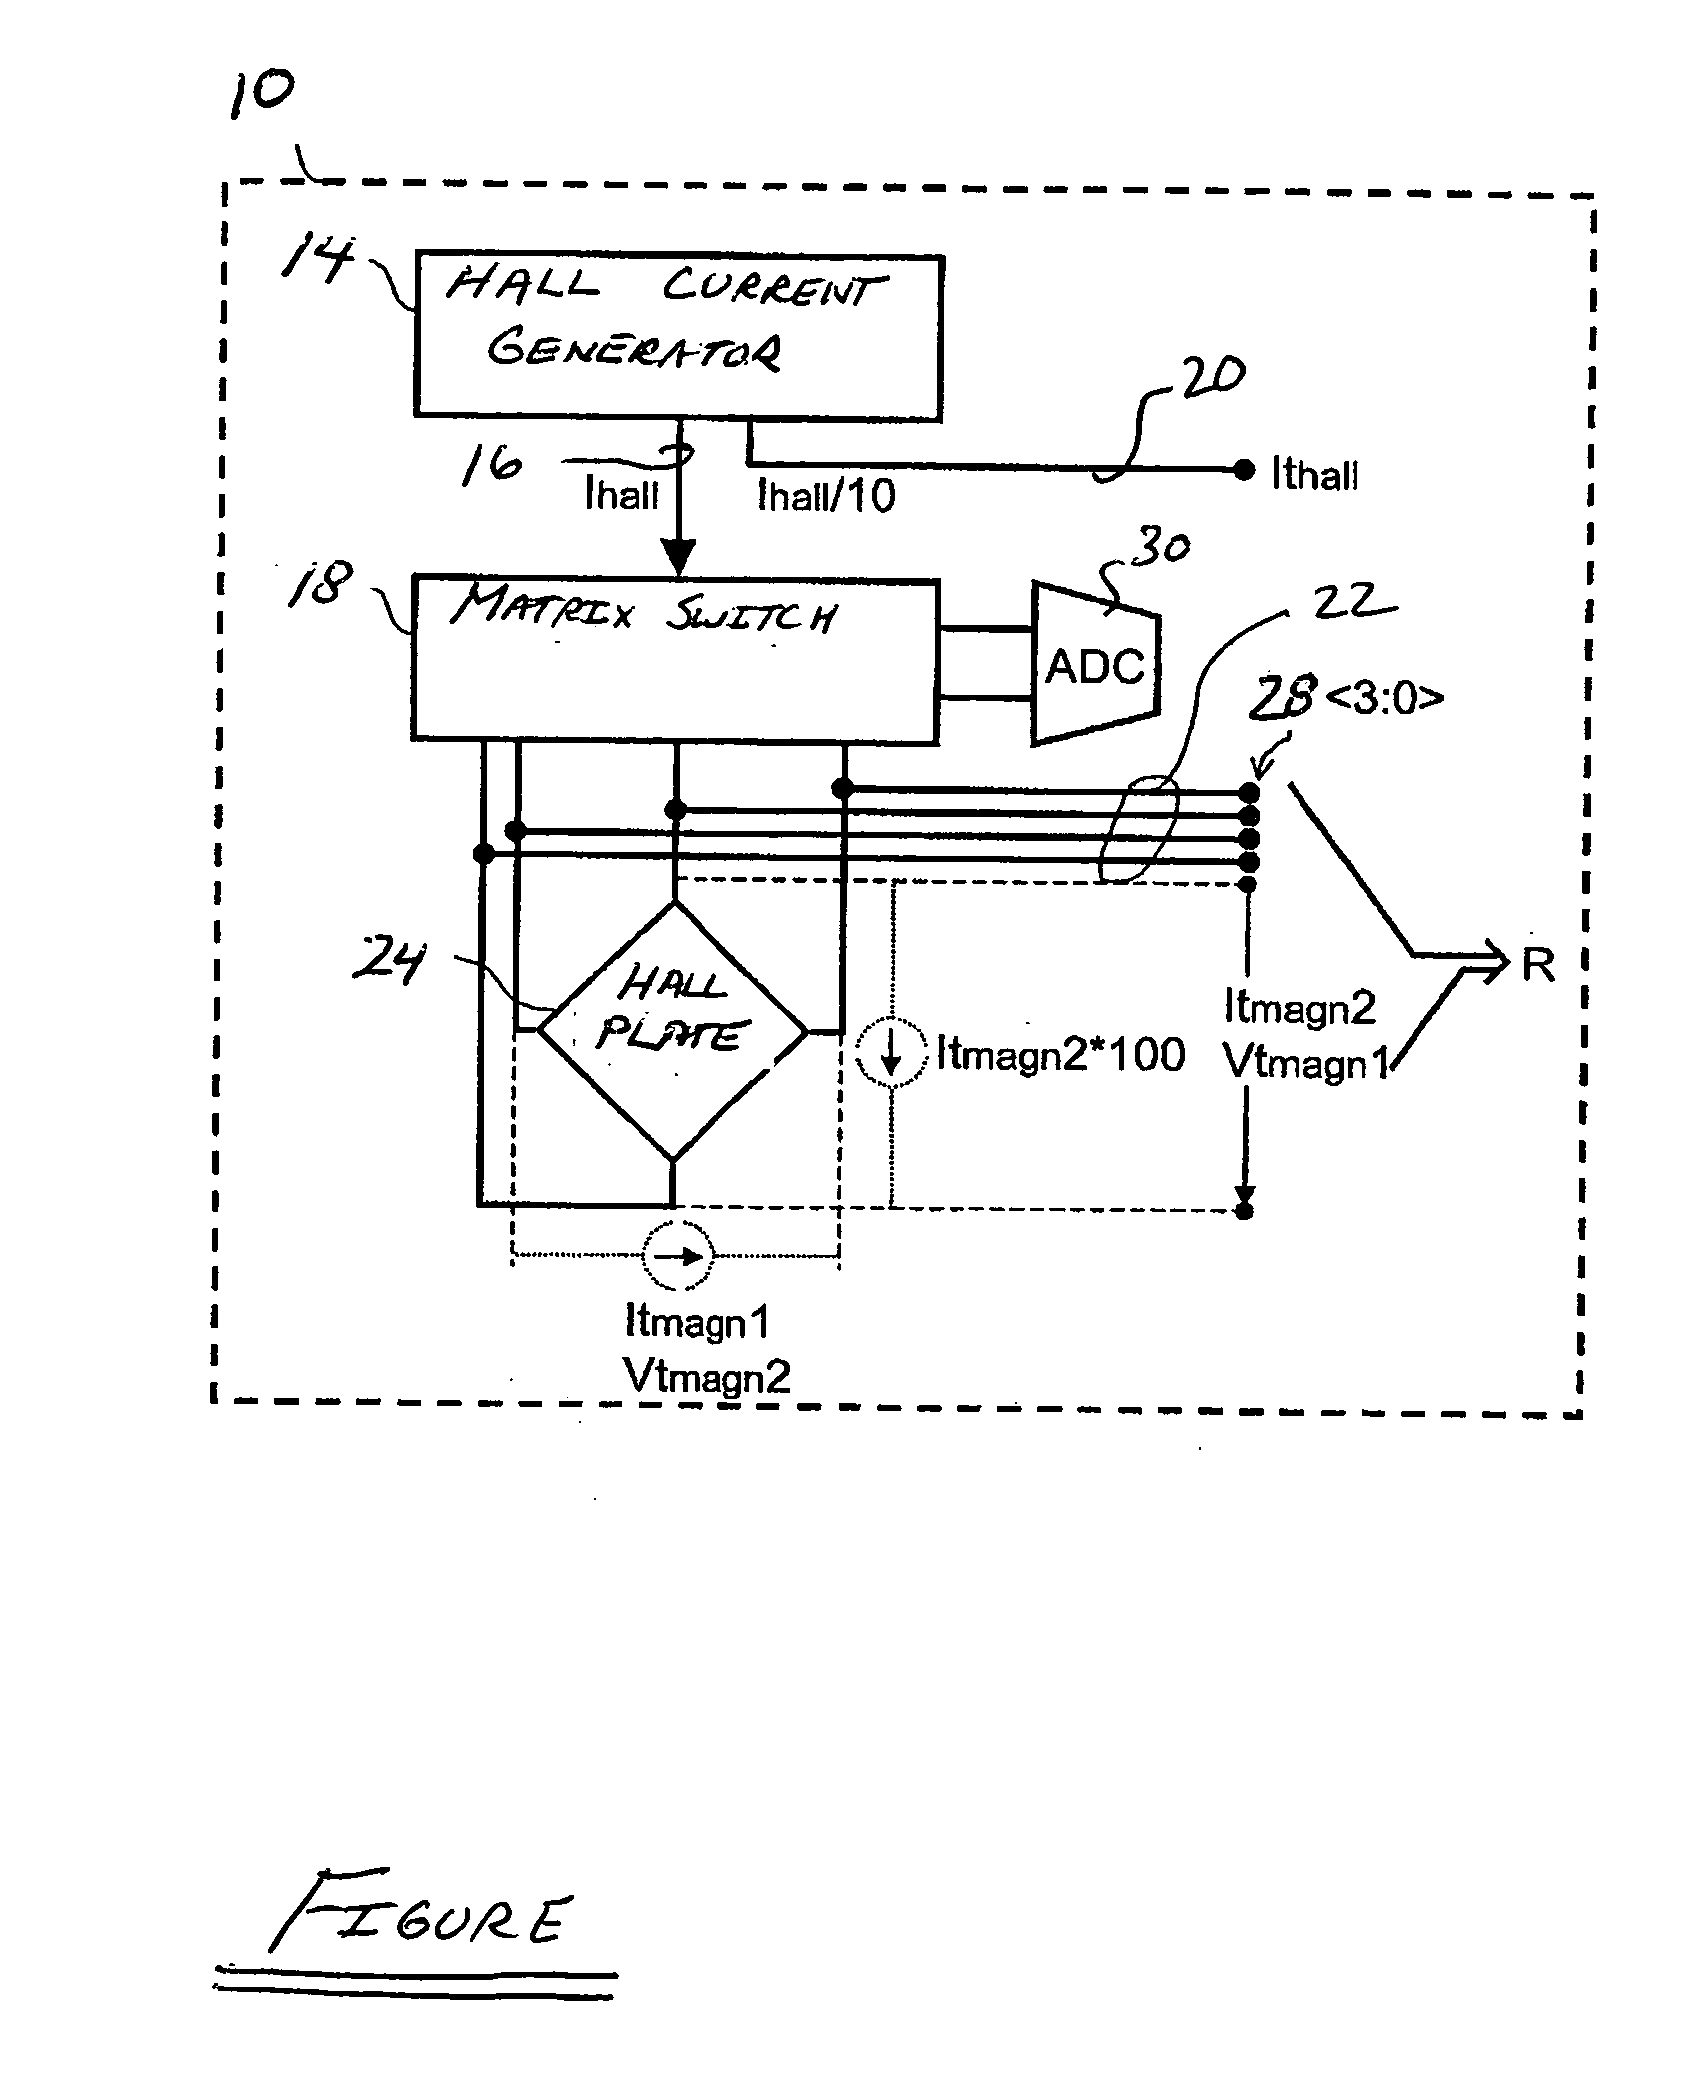 Method for testing a hall magnetic field sensor on a wafer